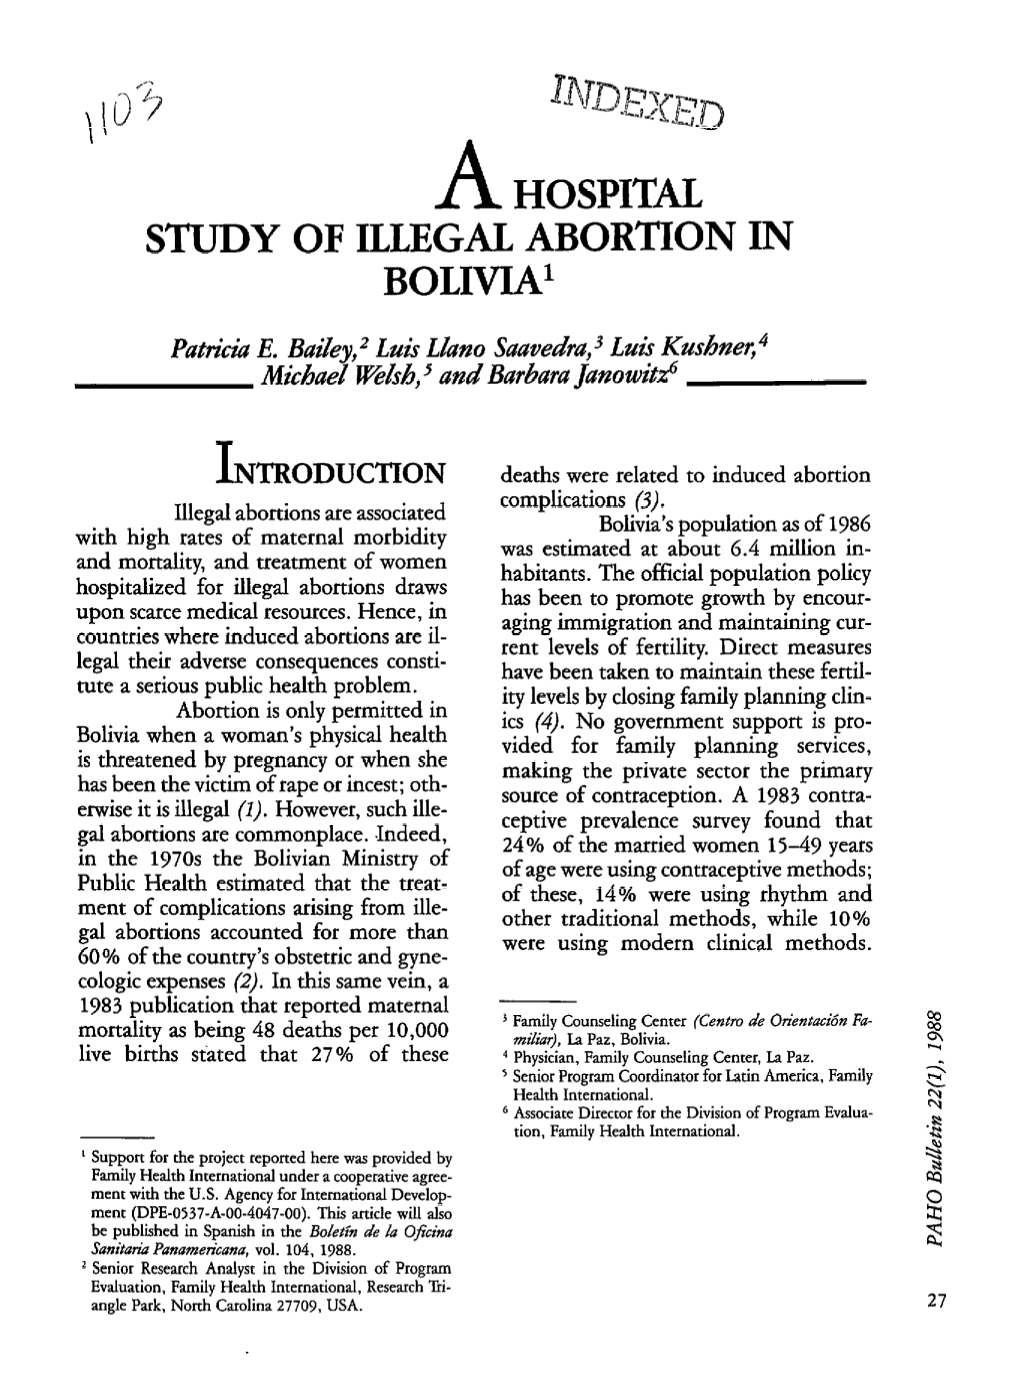 Study of Illegal Abortion in Bolivia1